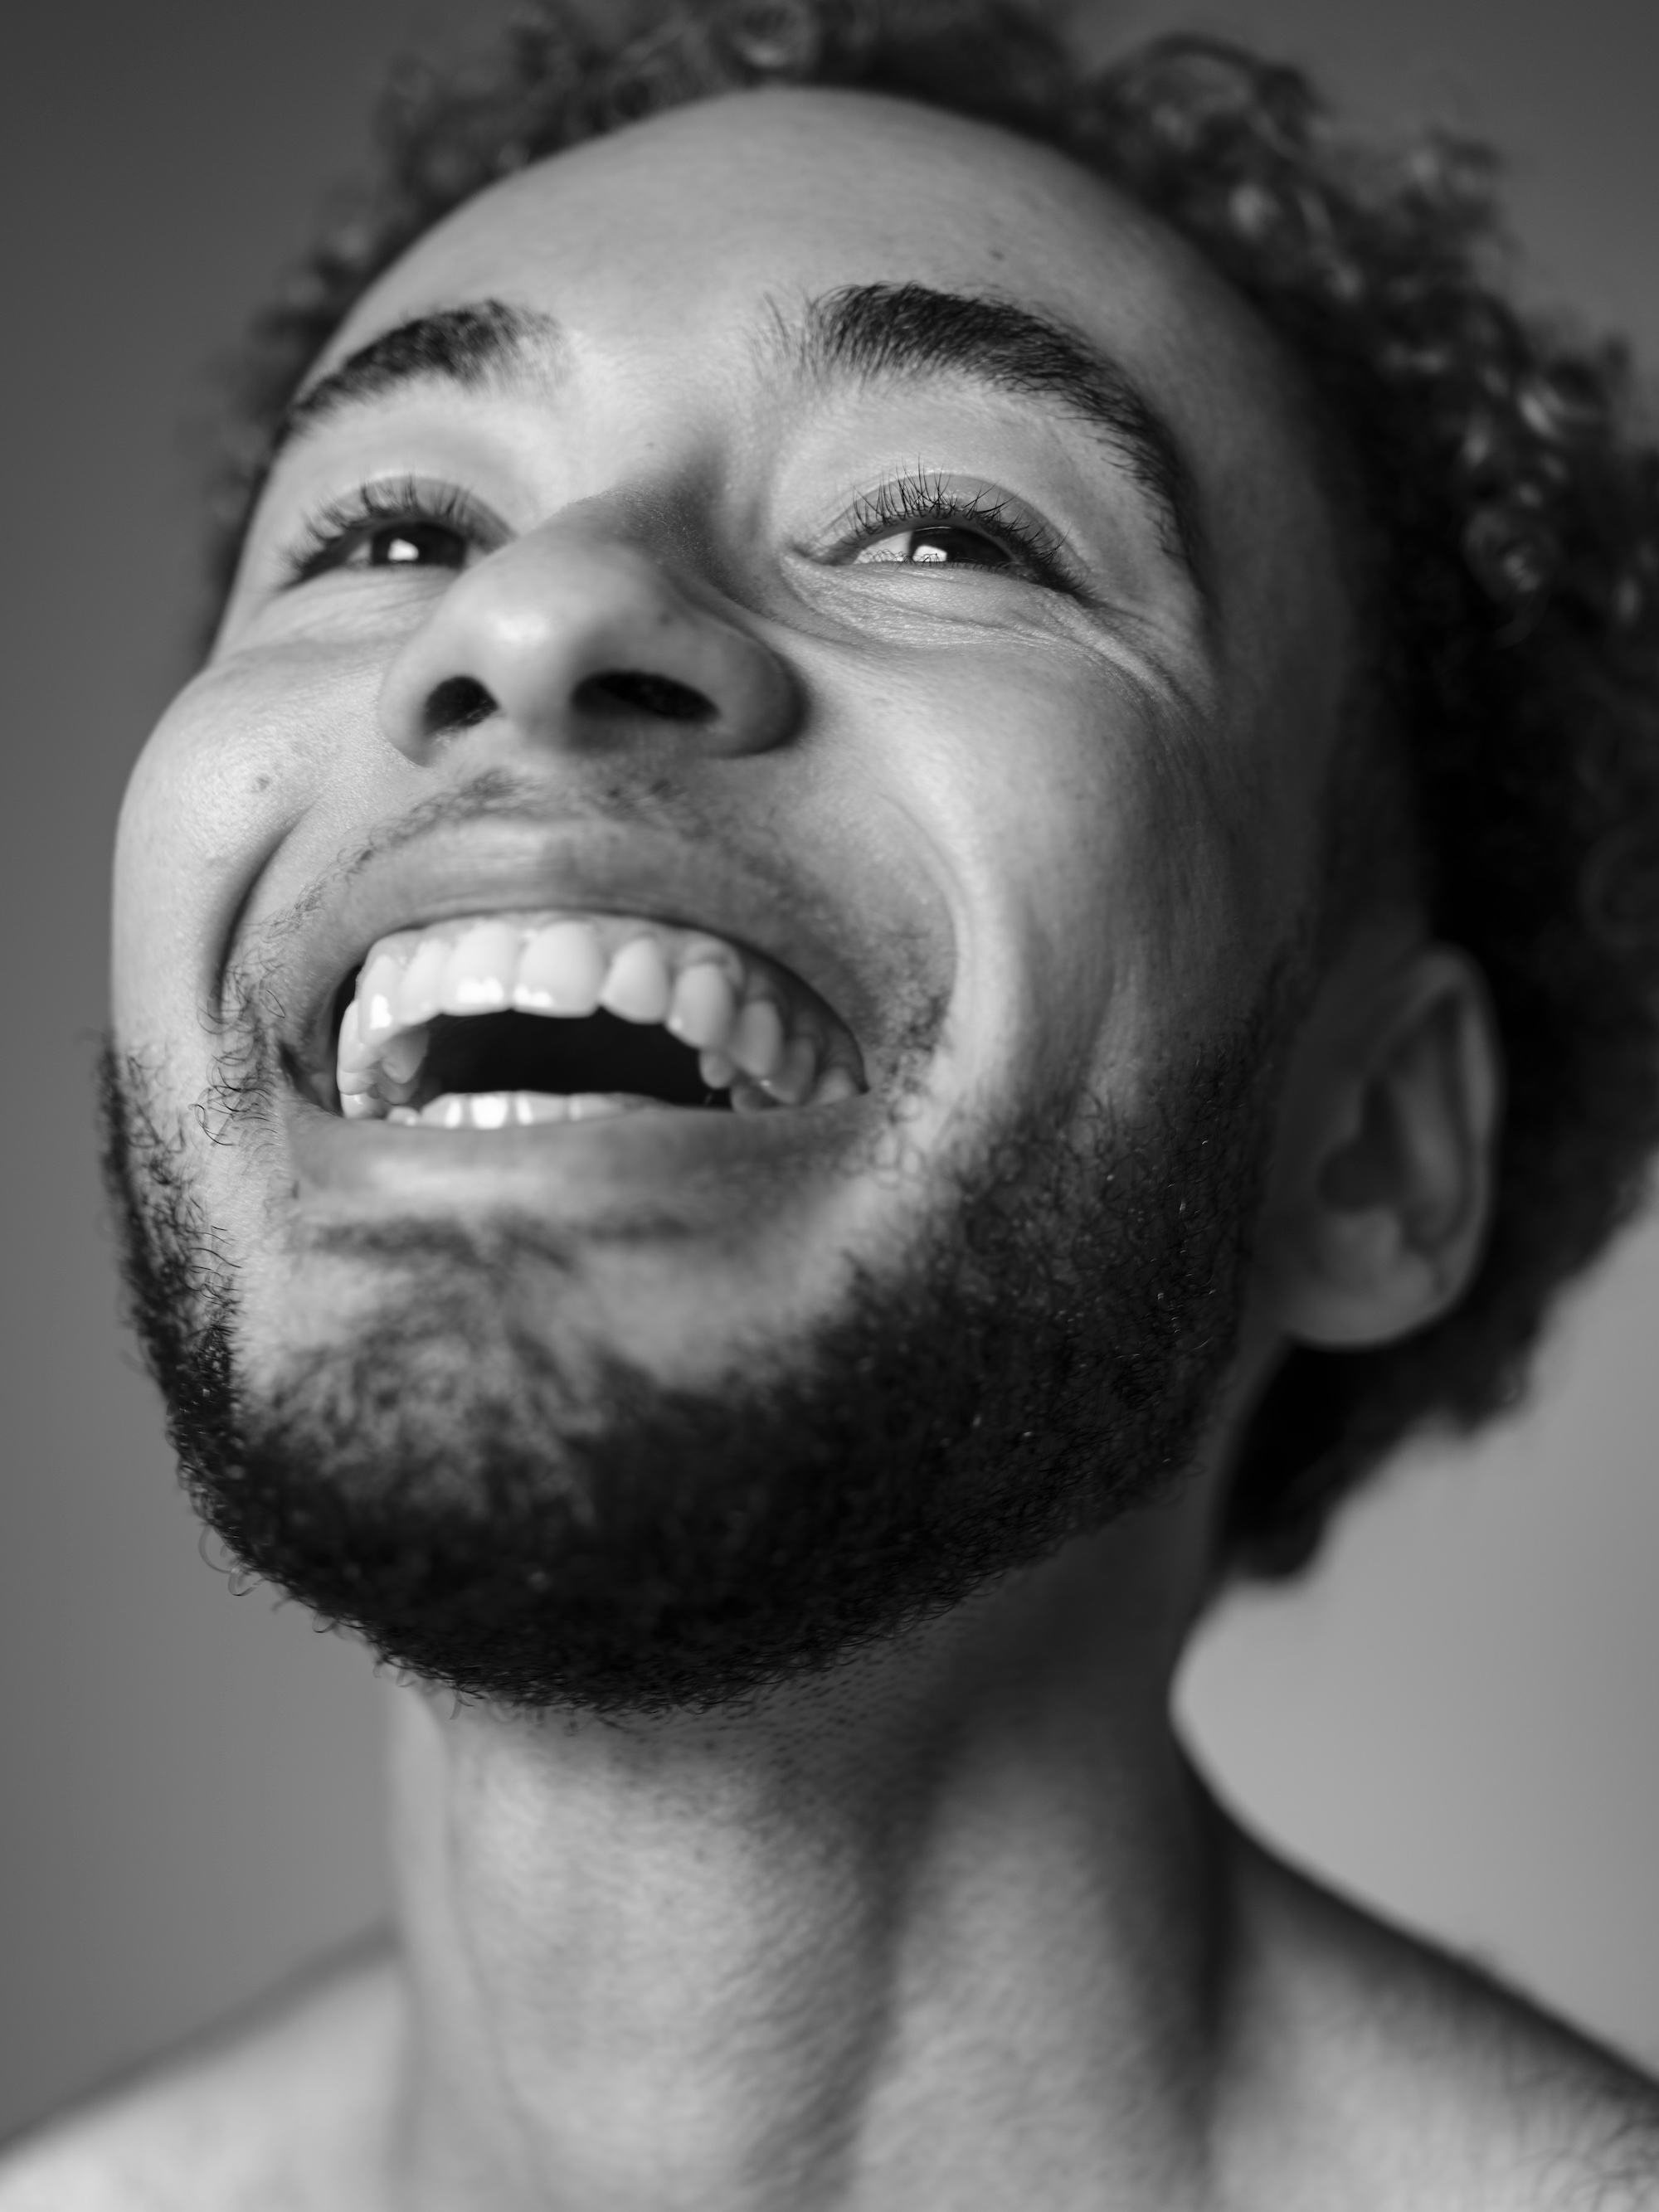 A black-and-white close-up portrait of the photographer, Marvel Harris, looking up and smiling brightly